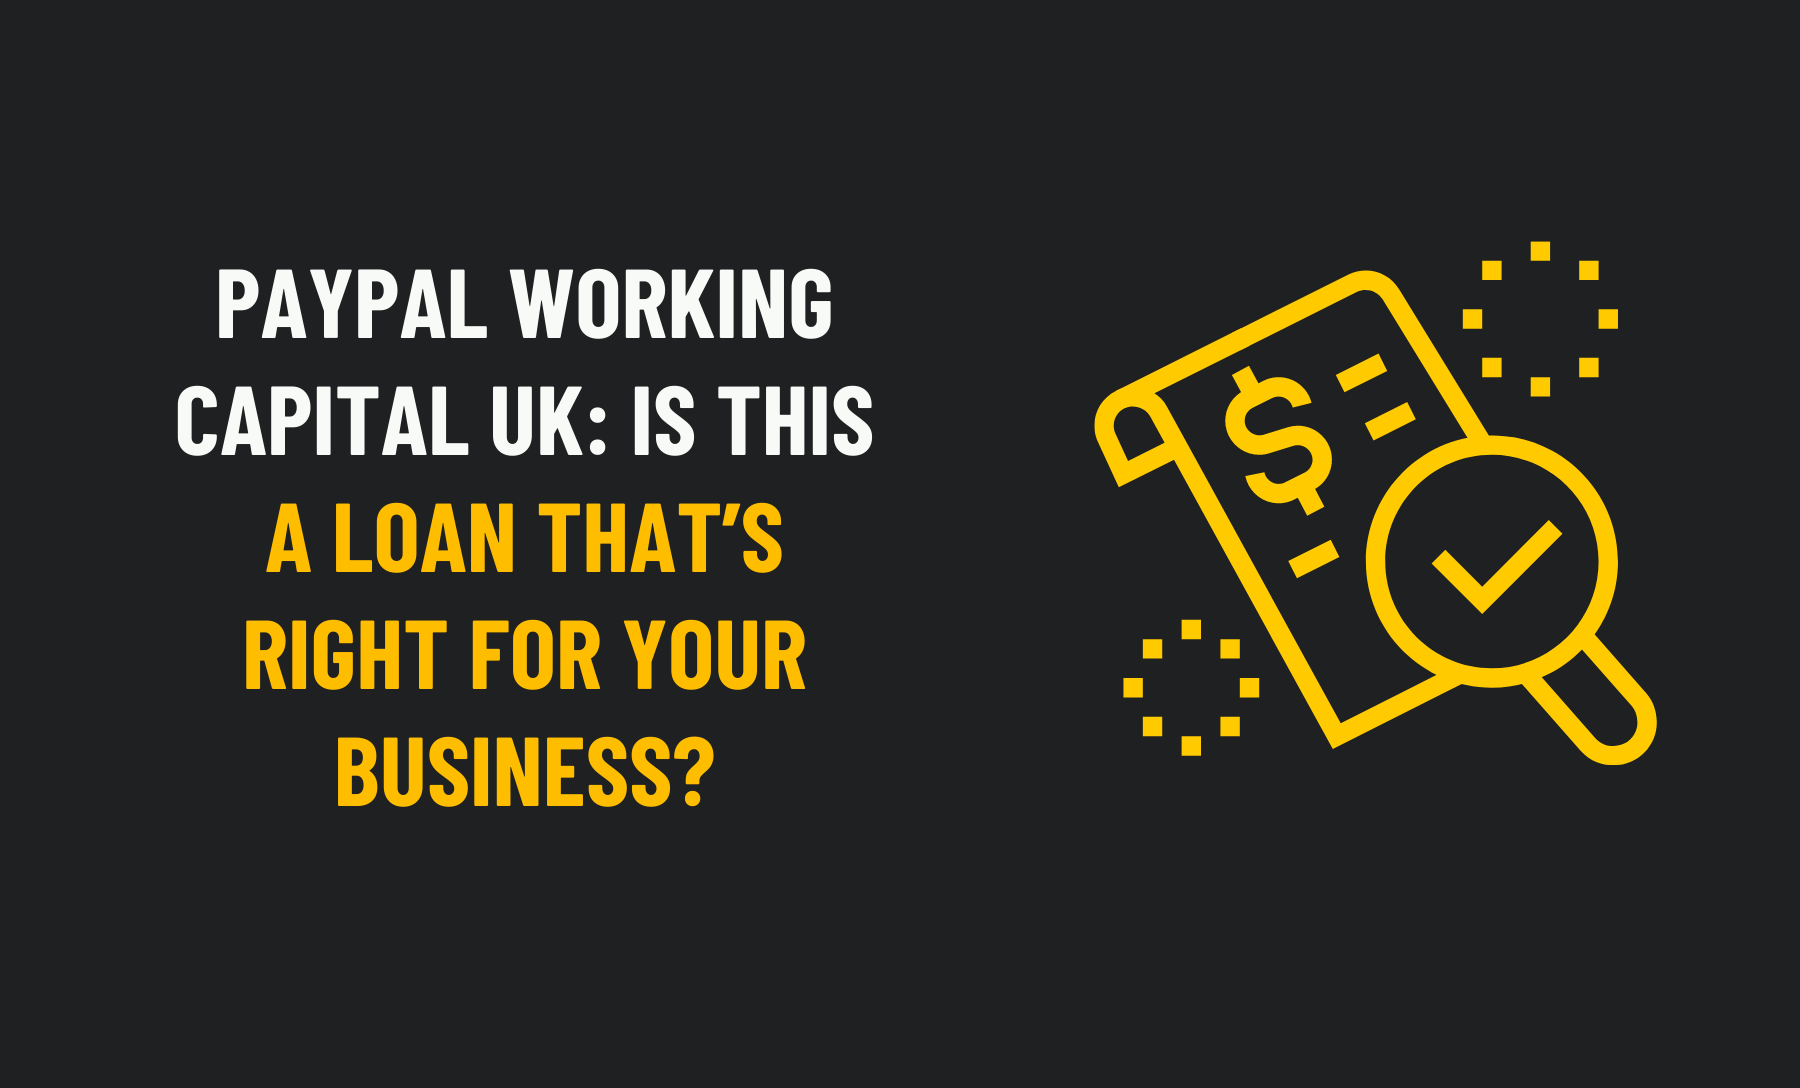 PayPal Working Capital UK